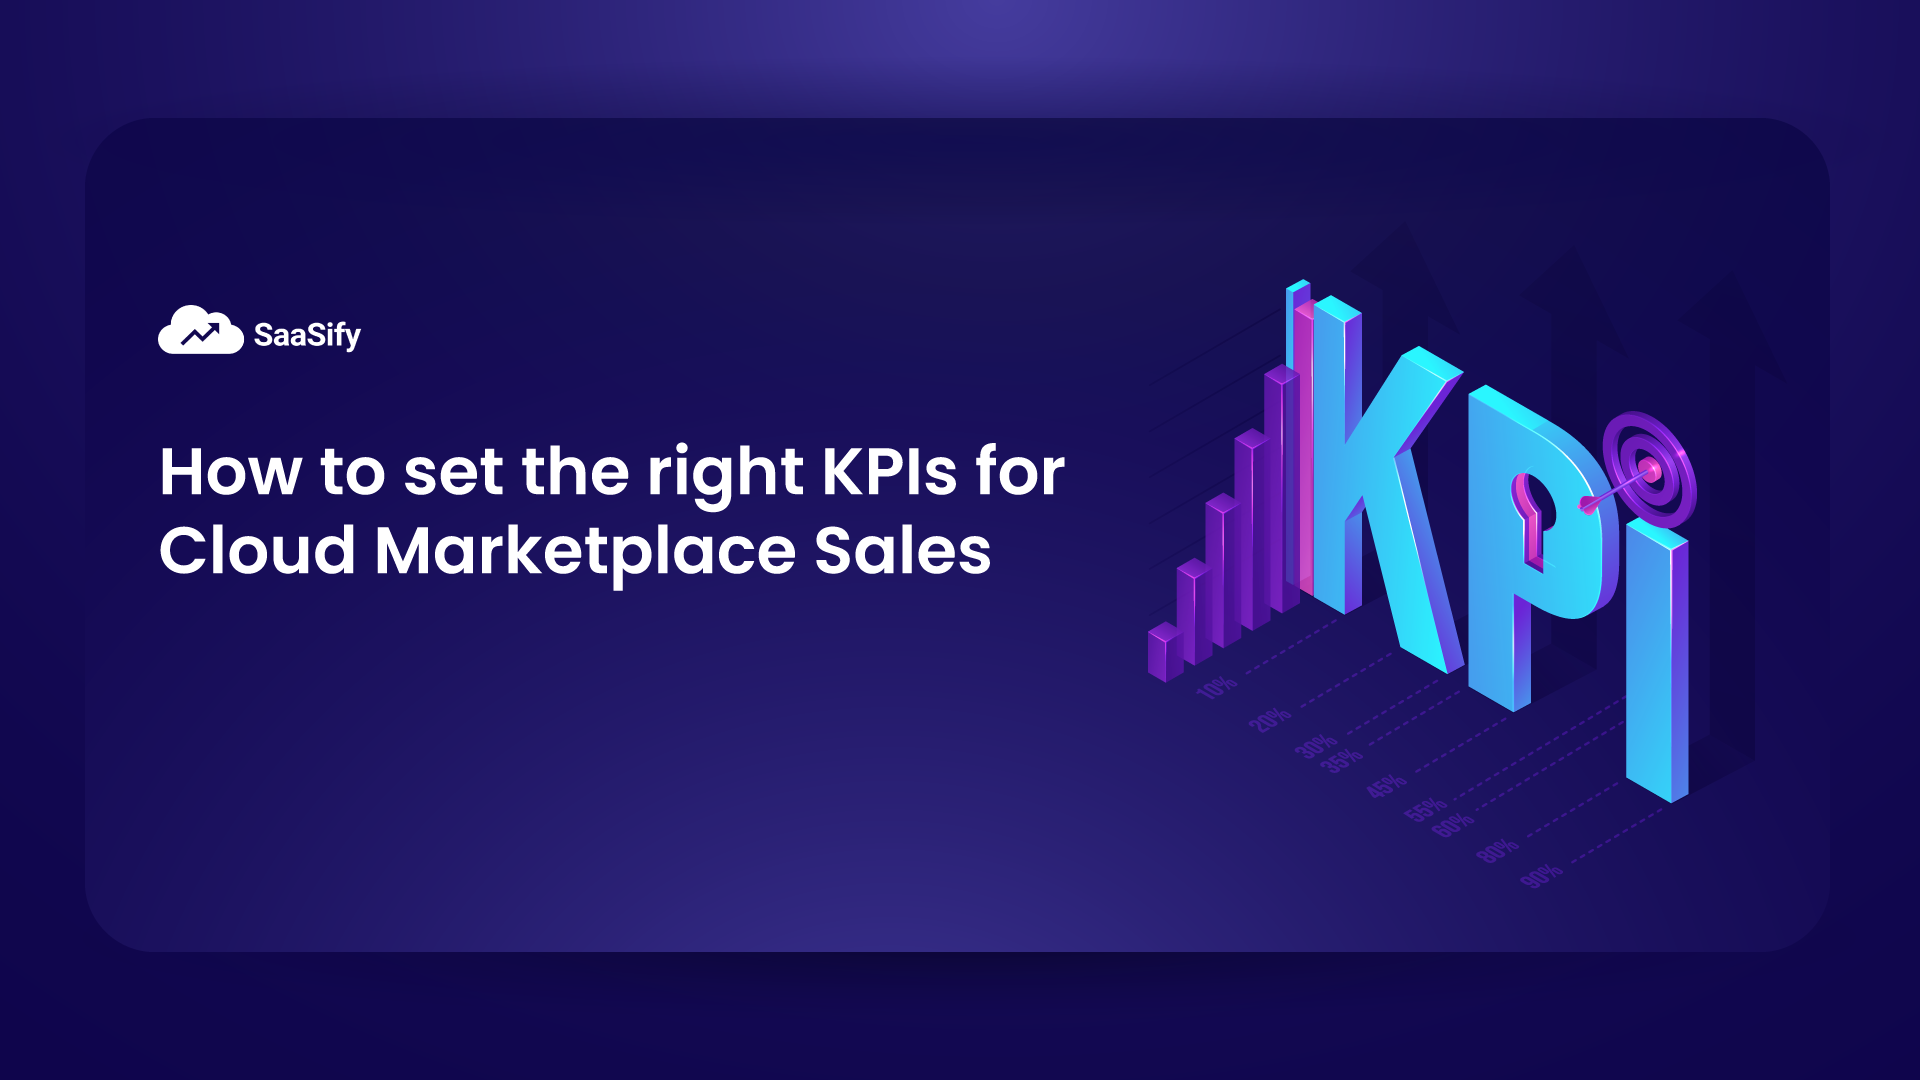 How to set the right KPIs for Cloud Marketplace Sales?